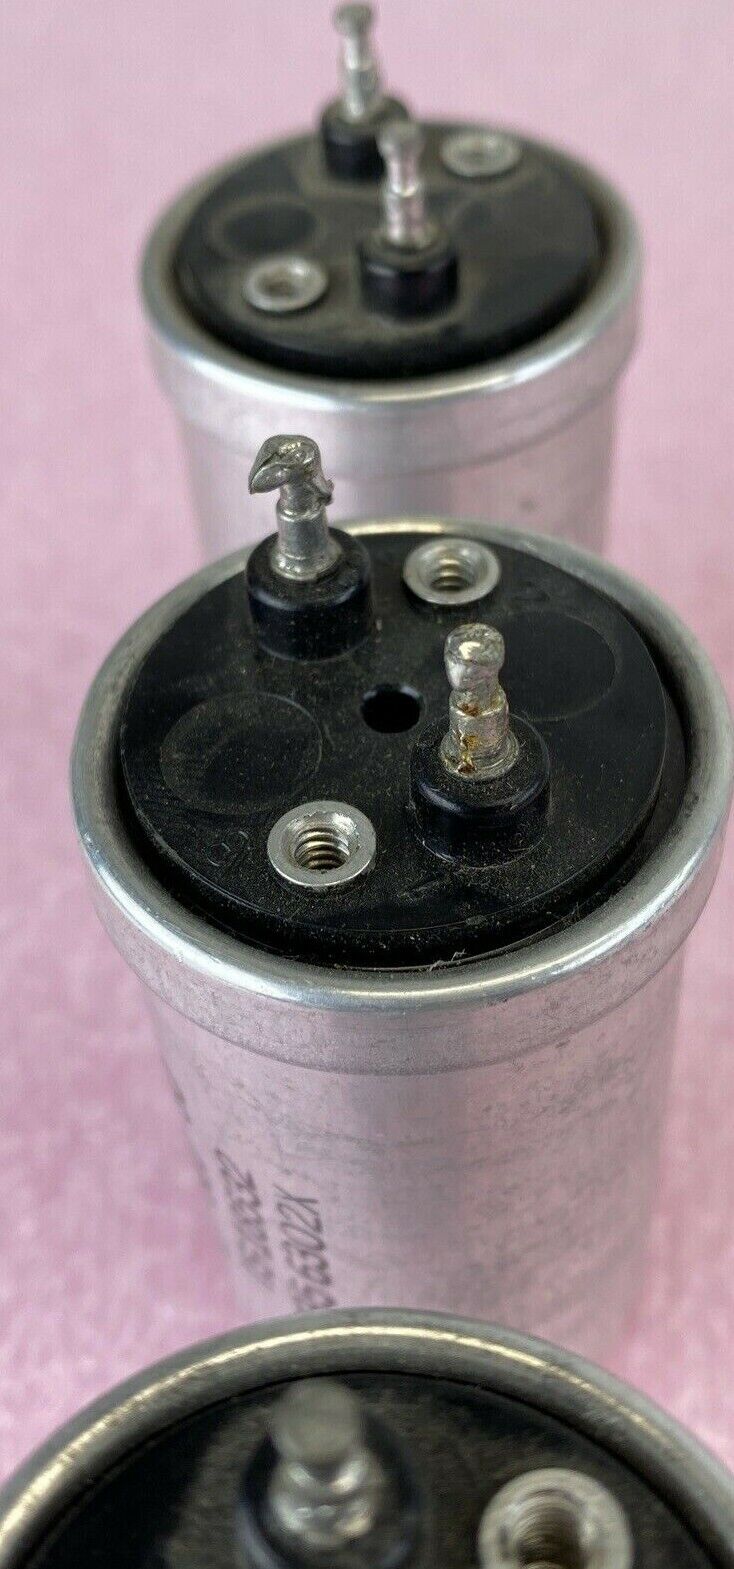 Lot of 3 Mallory TS-18532 800MFD 50VDC electrolytic capacitor 2356302X